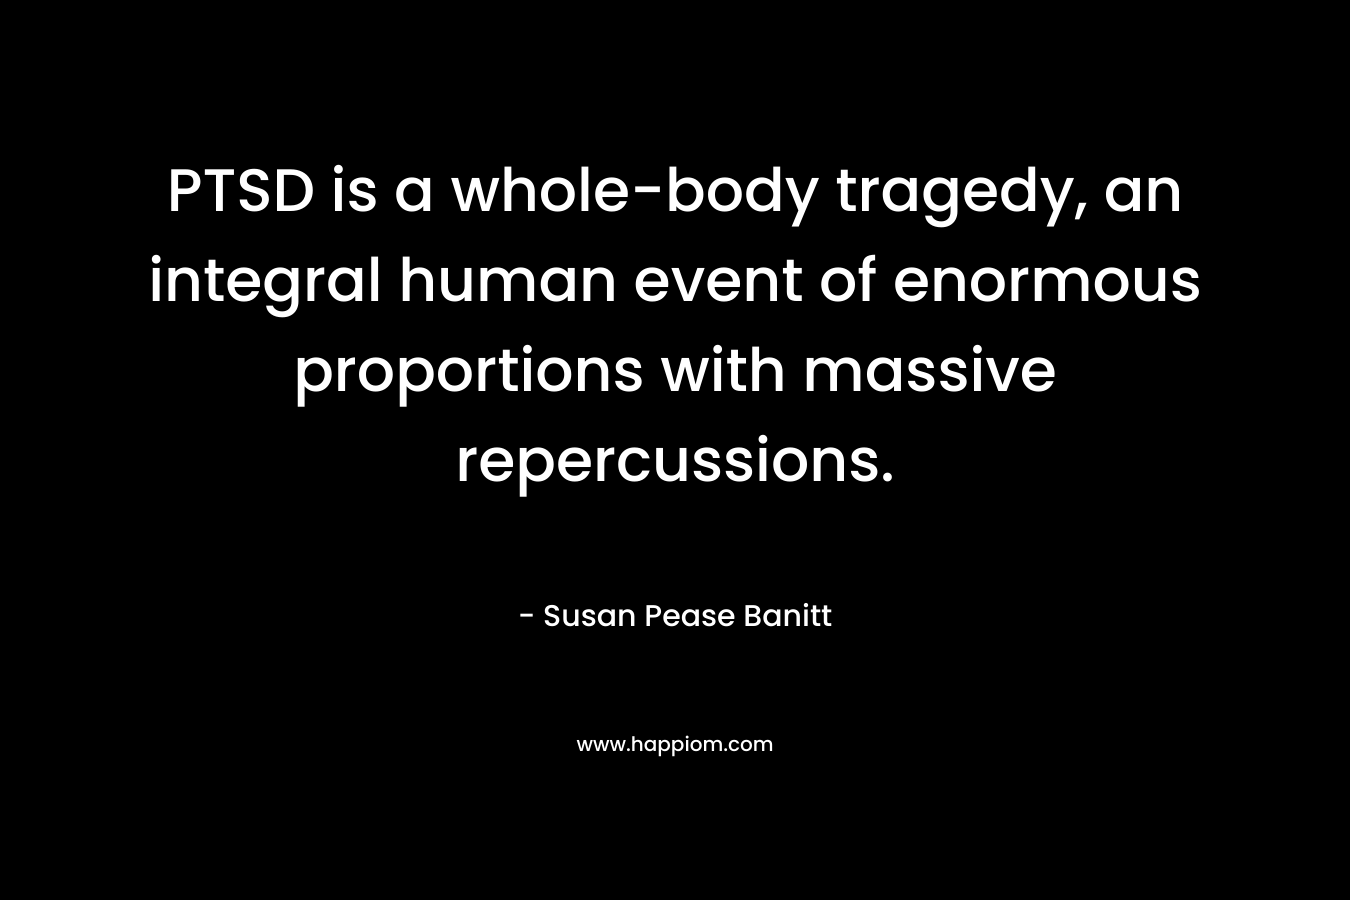 PTSD is a whole-body tragedy, an integral human event of enormous proportions with massive repercussions.